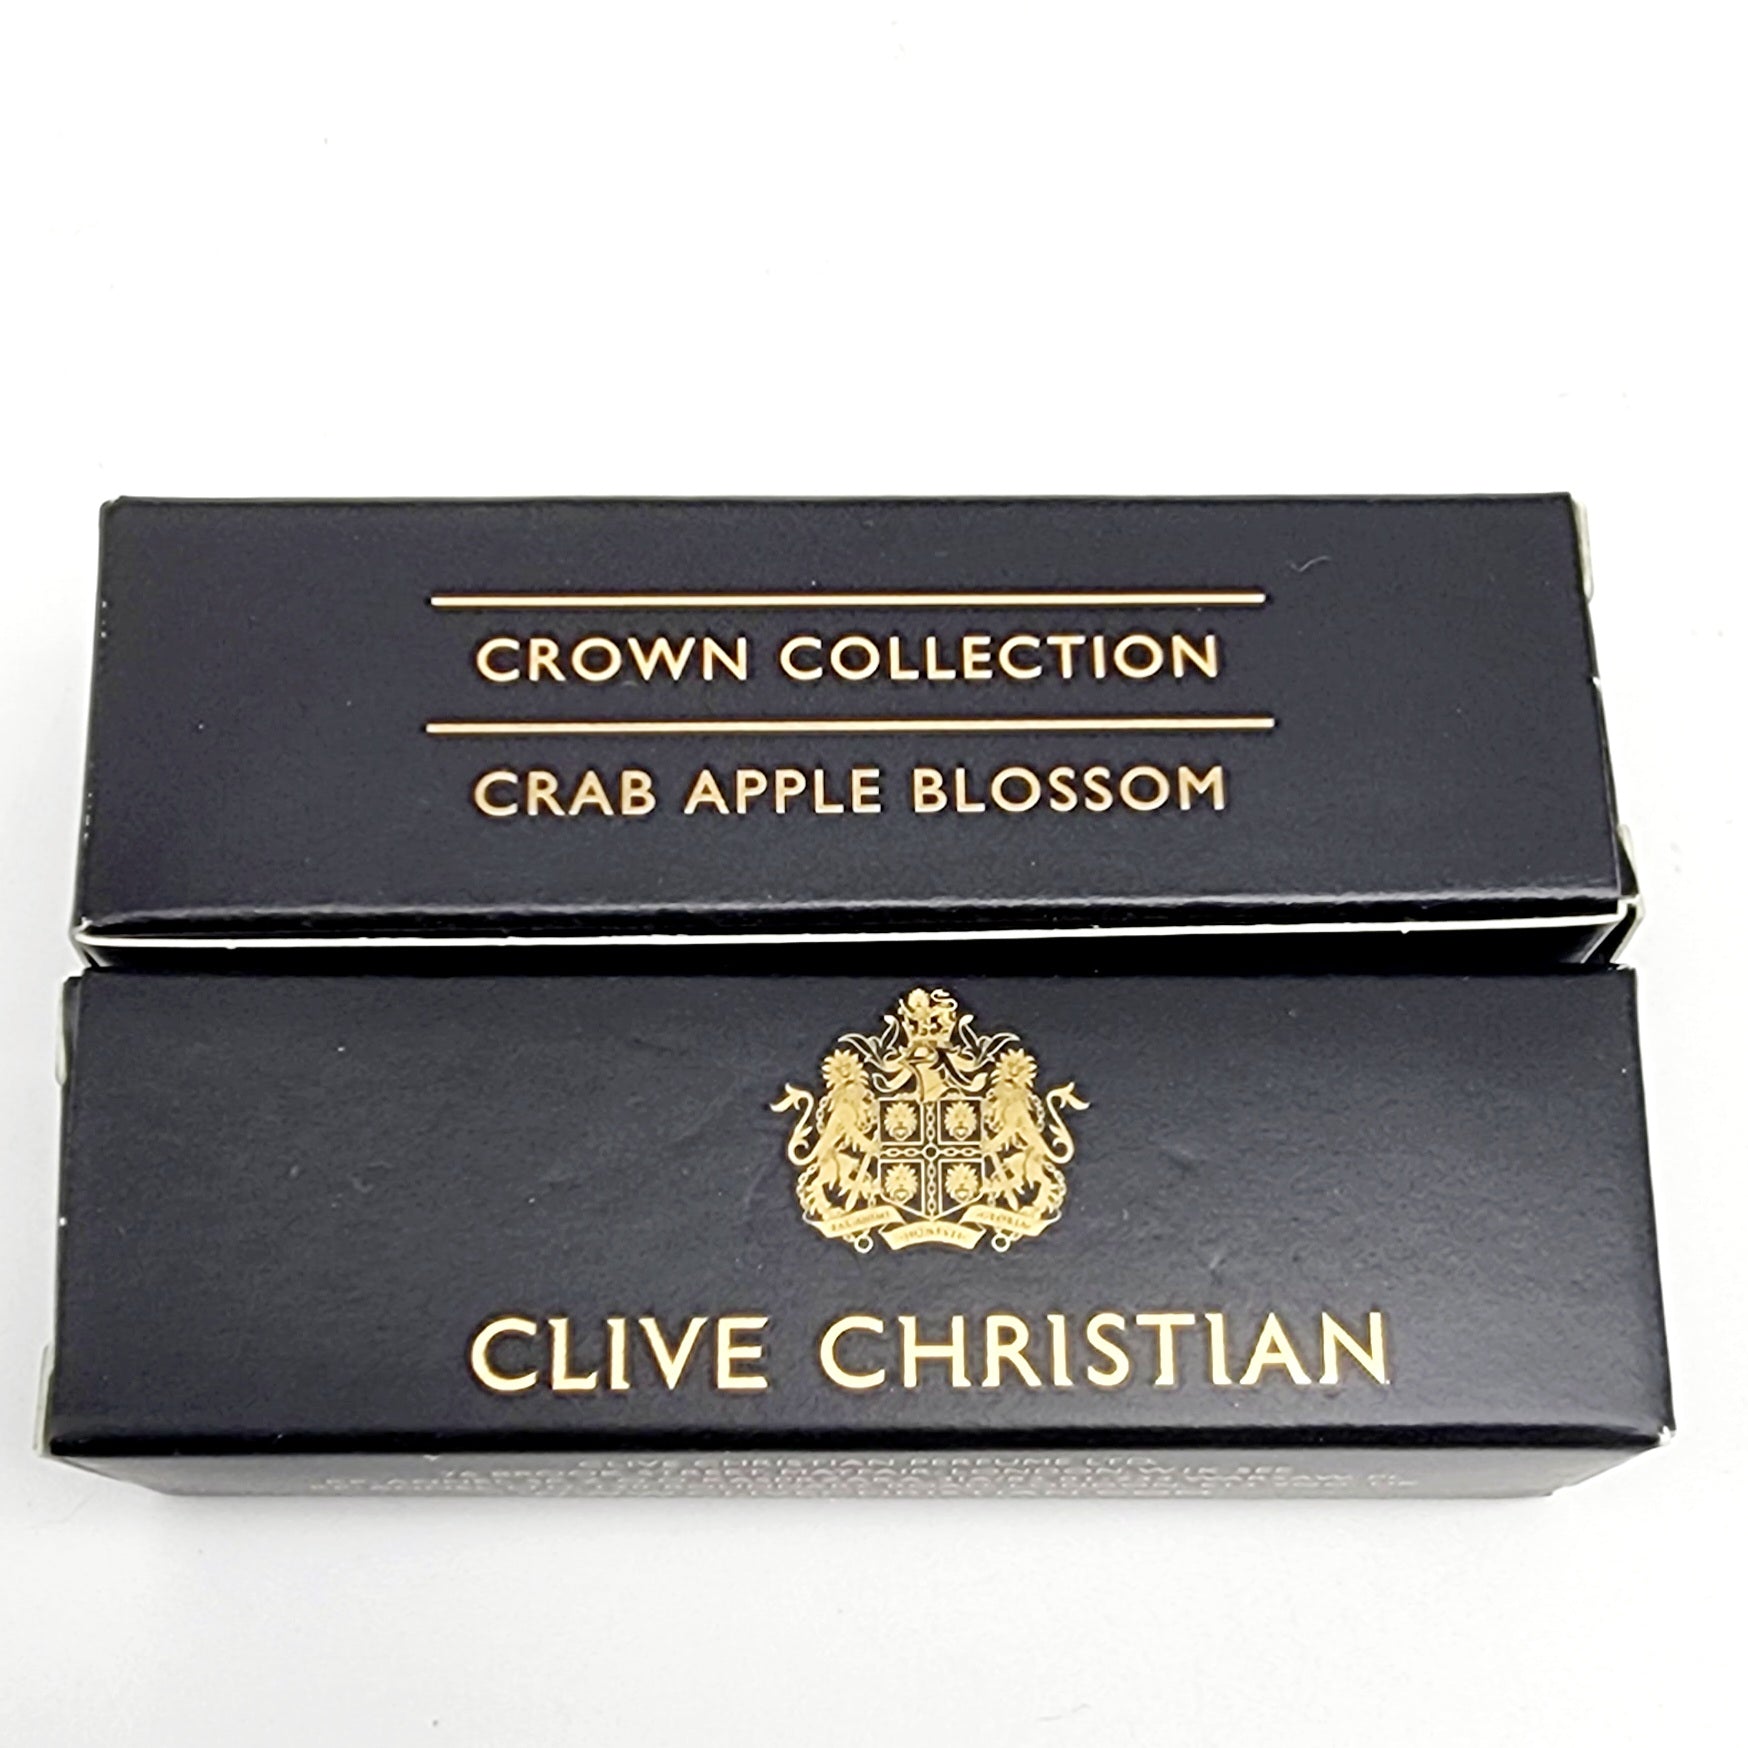 Clive Christian 2ml Mini Spray ~ Free with Purchase (T&C)